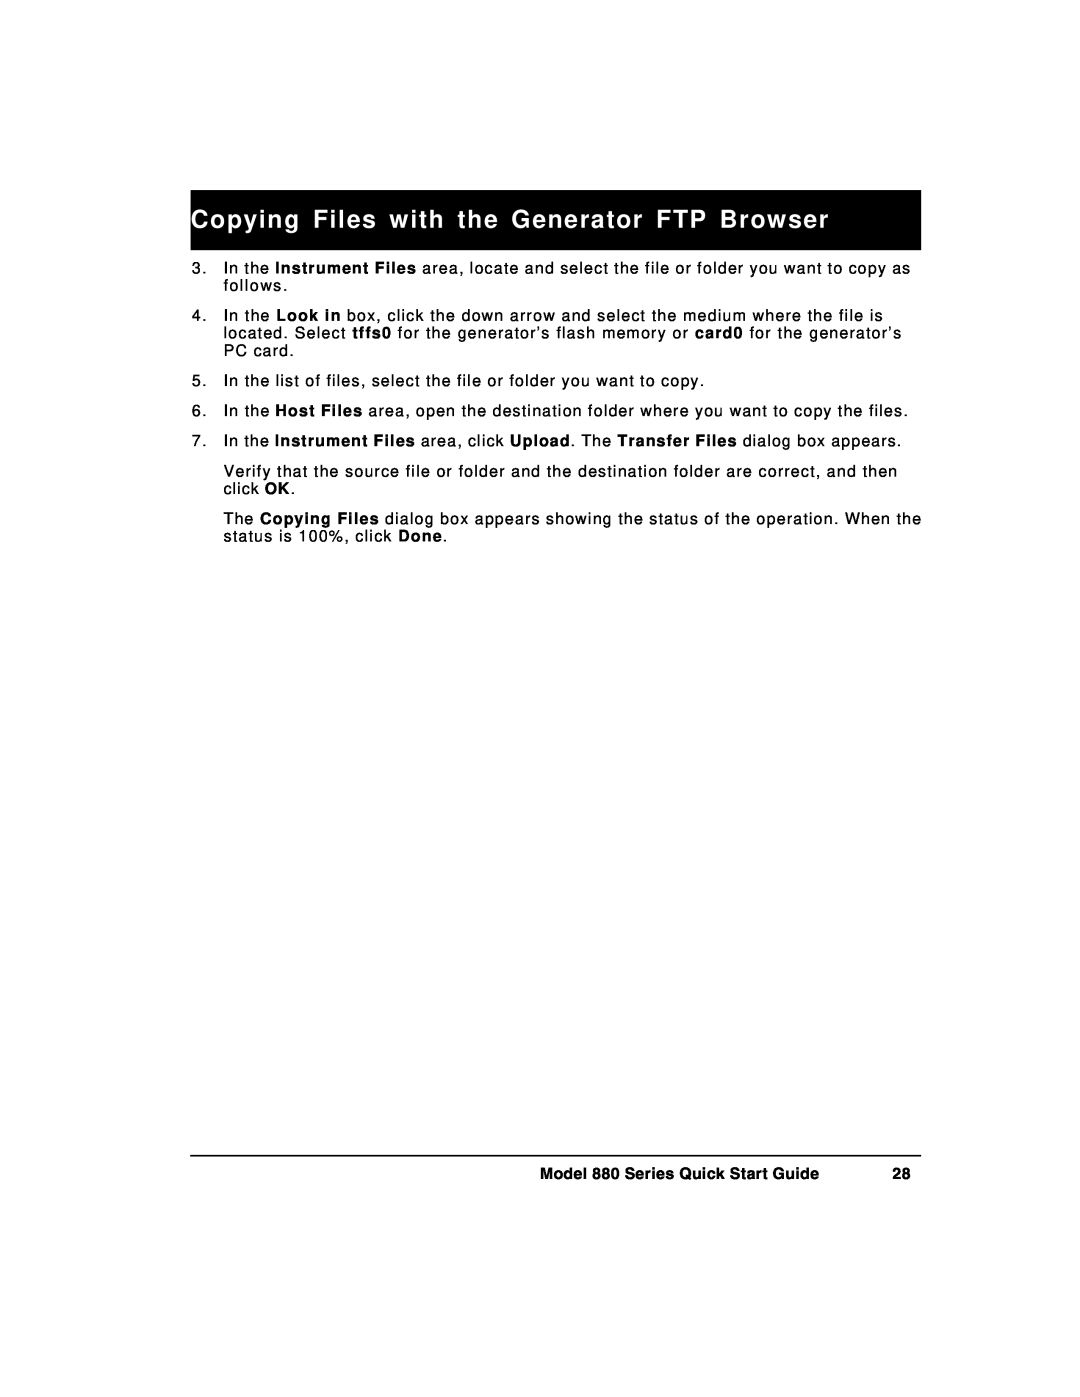 Quantum Data quick start Copying Files with the Generator FTP Browser, Model 880 Series Quick Start Guide 